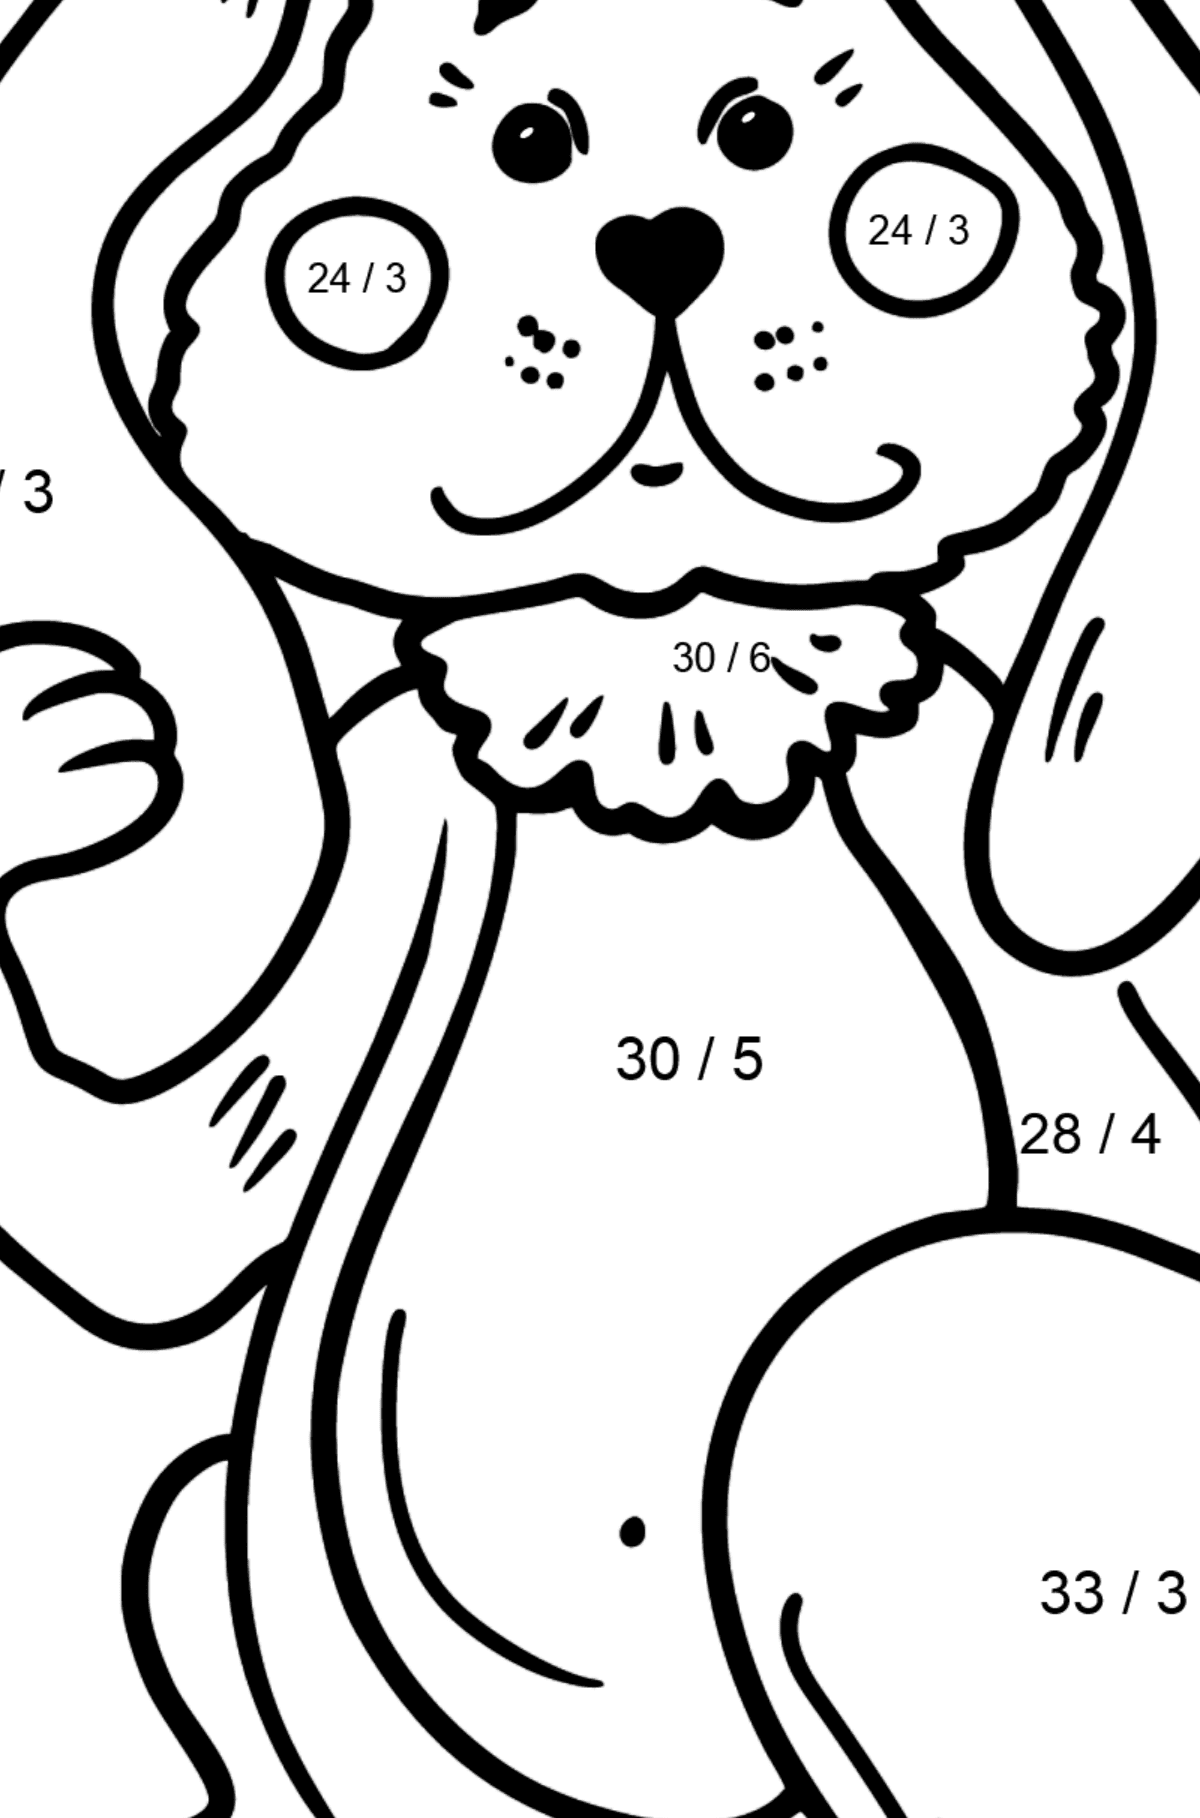 Sad Bunny coloring page - Math Coloring - Division for Kids